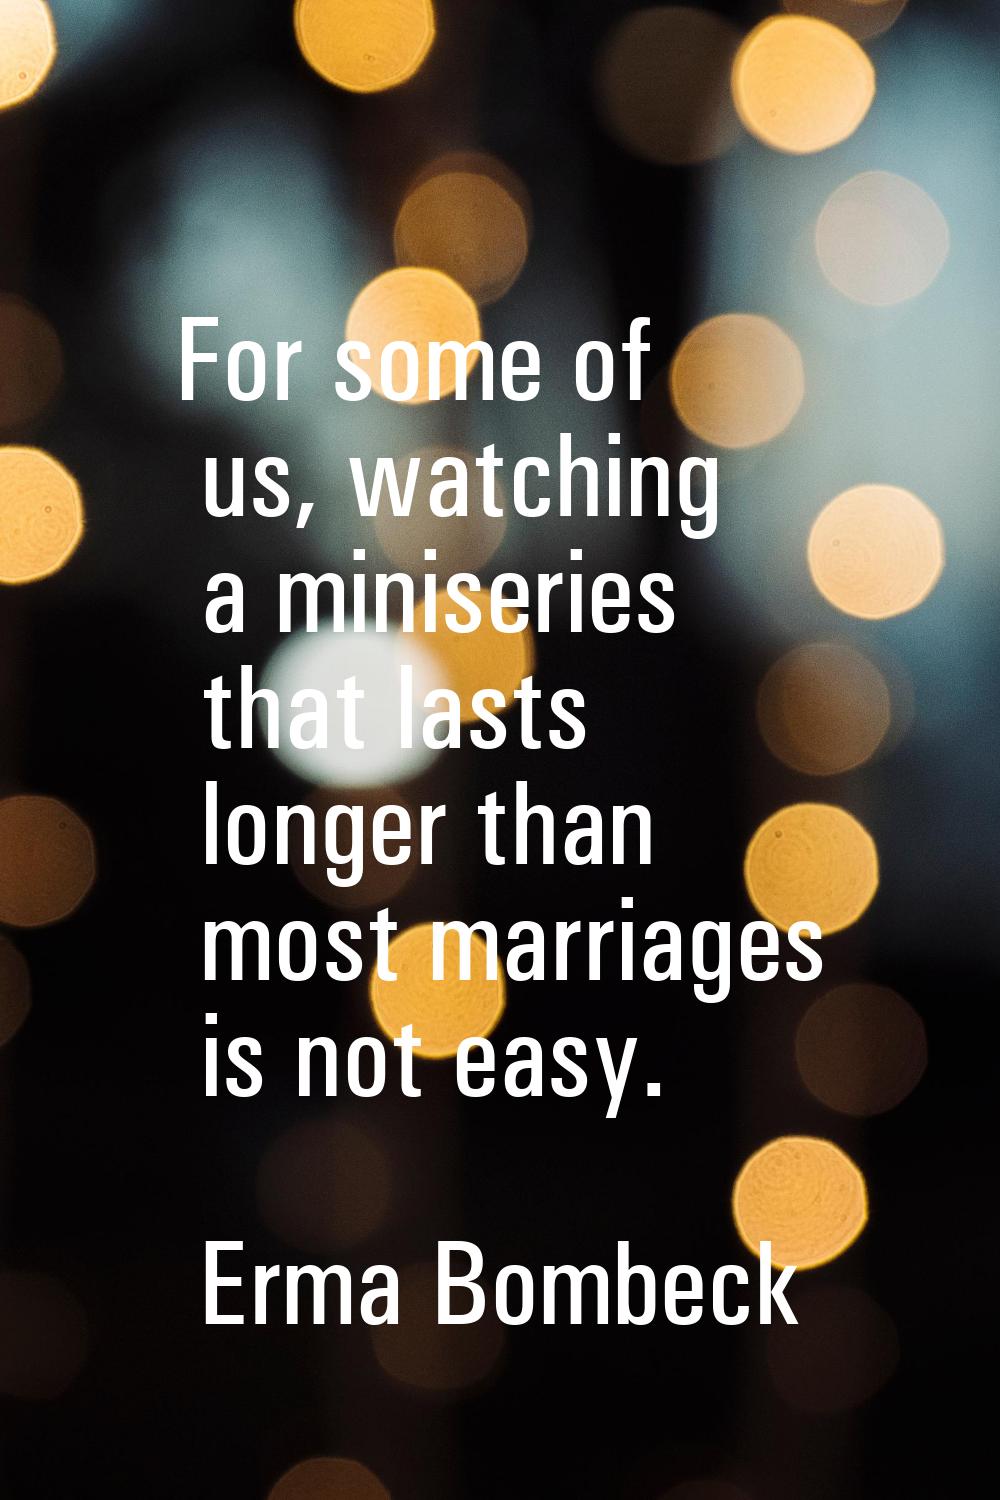 For some of us, watching a miniseries that lasts longer than most marriages is not easy.